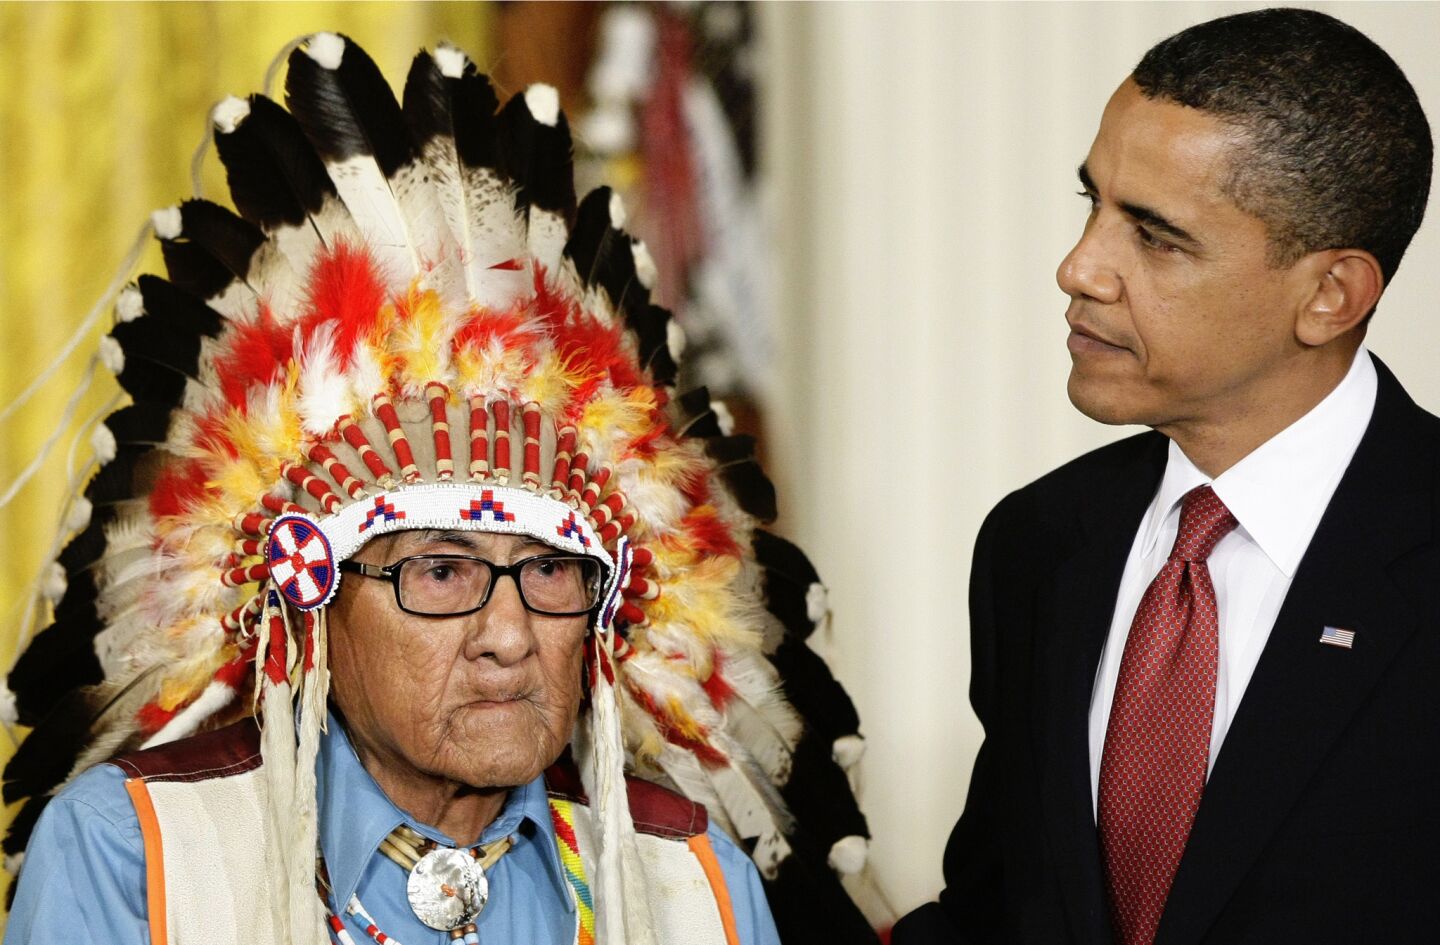 The acclaimed Native American historian was the last surviving war chief of Montana's Crow Tribe. President Obama awarded him the Presidential Medal of Freedom in 2009. He was 102. Full obituary